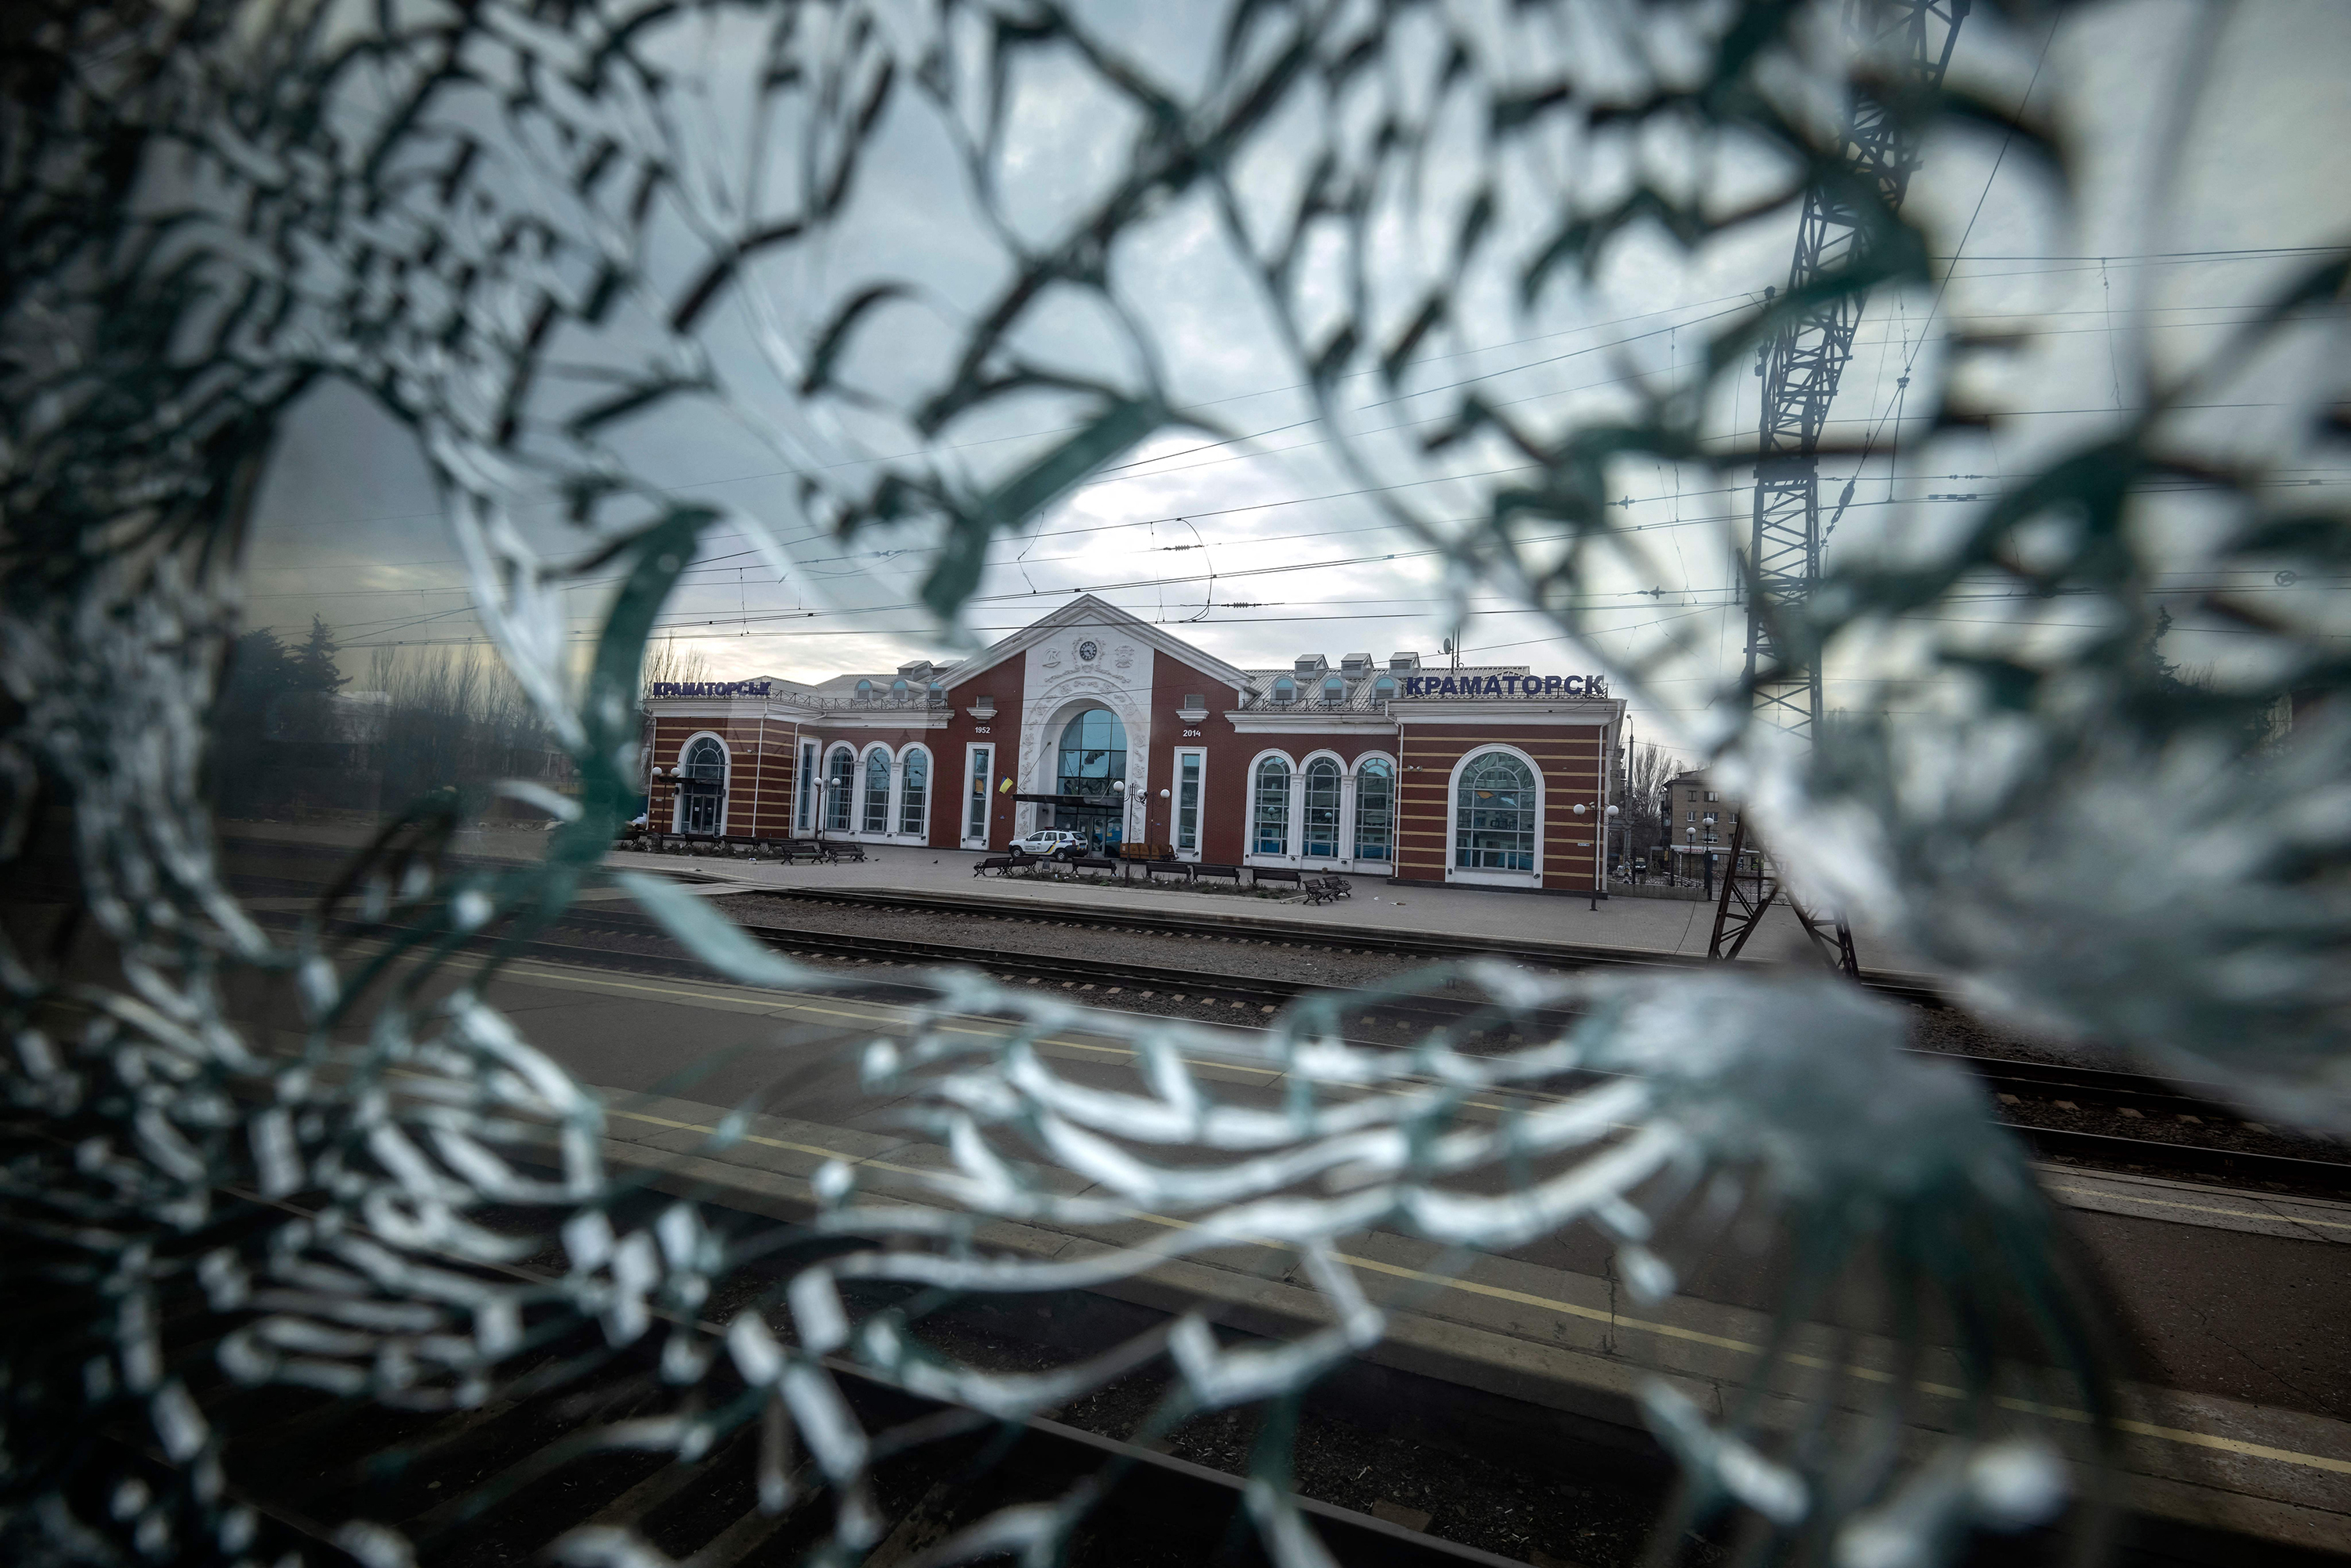 The Kramatorsk train station is seen from the broken window of a train car on April 8.